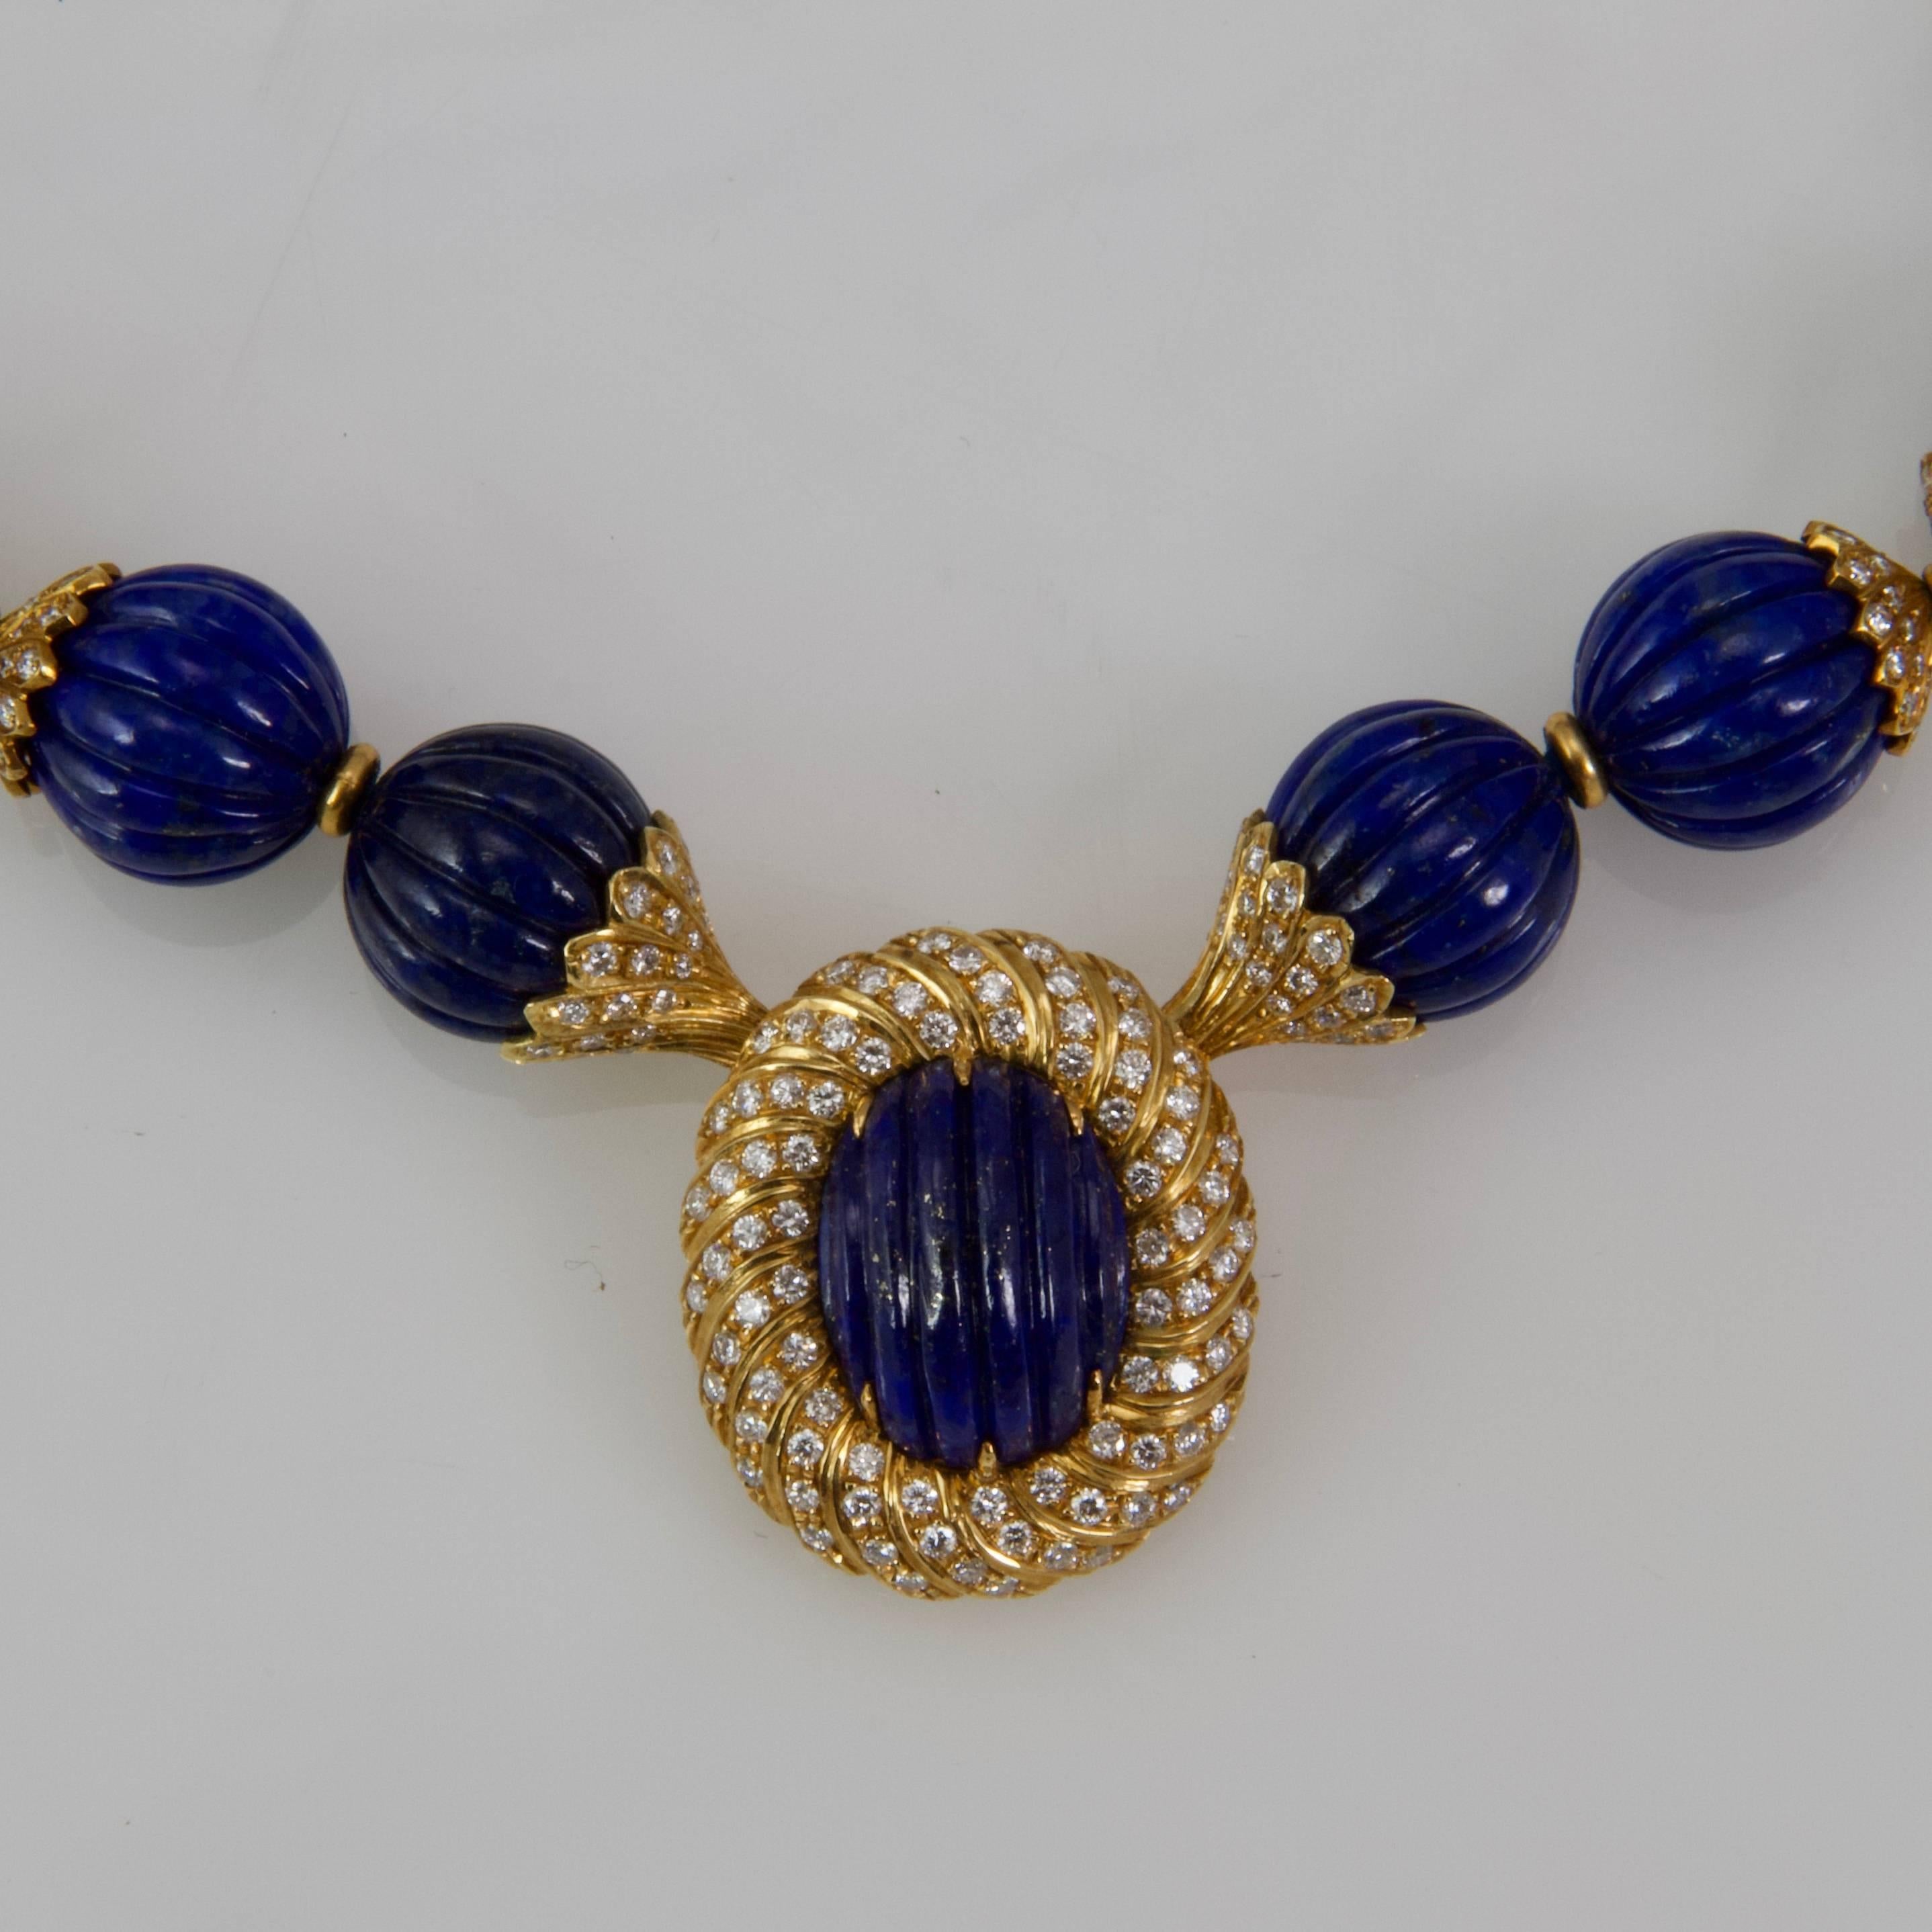 33 engraved watermelon shape lapis lazuli necklace, yellow gold interlayer which six are set with round diamonds as well as central oval pattern pendant. 
Signed by the great italian jeweller Missaglia. 
18kt yellow gold
Made around 1970
Lapis pearl